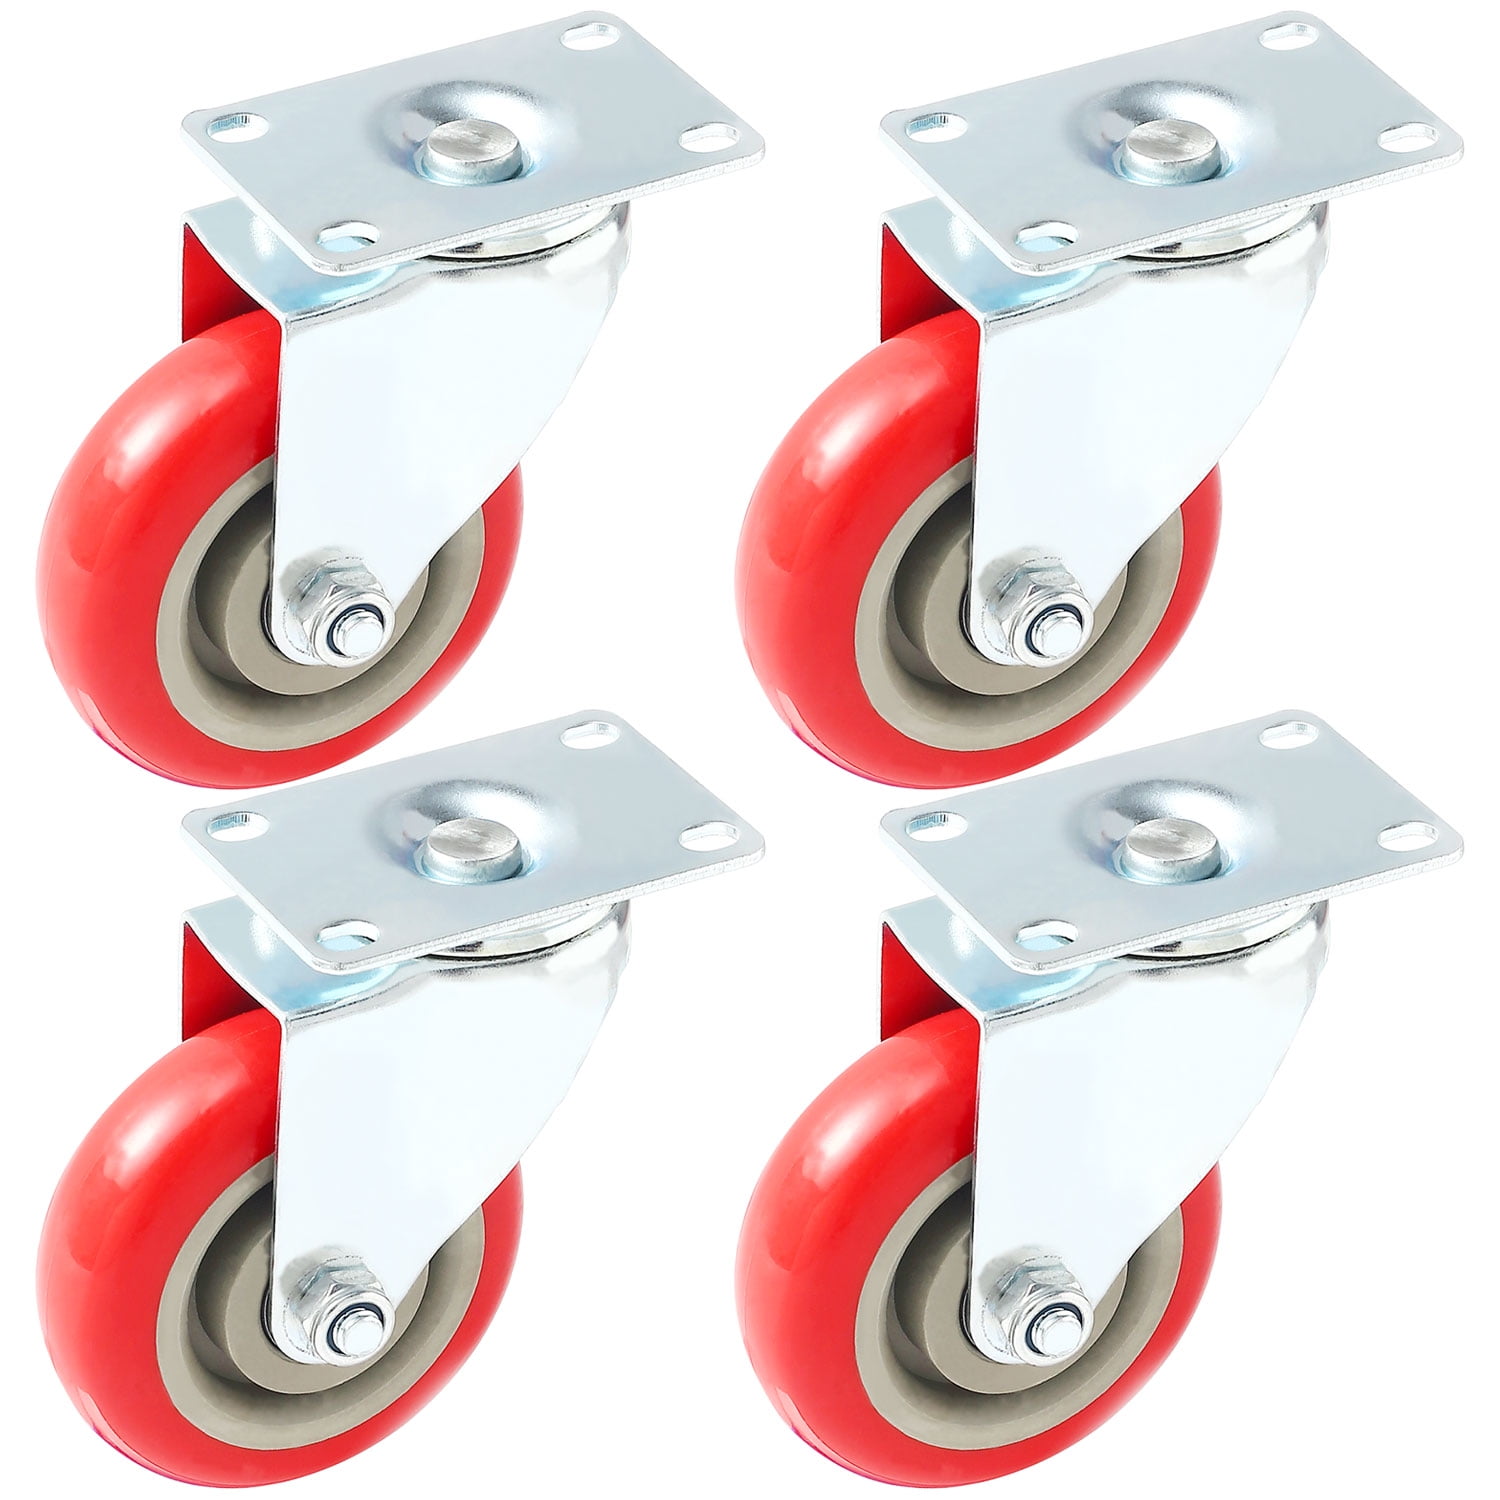 Commercial 3-Inch Top Plate Swivel PVC Caster Red 4-Pack